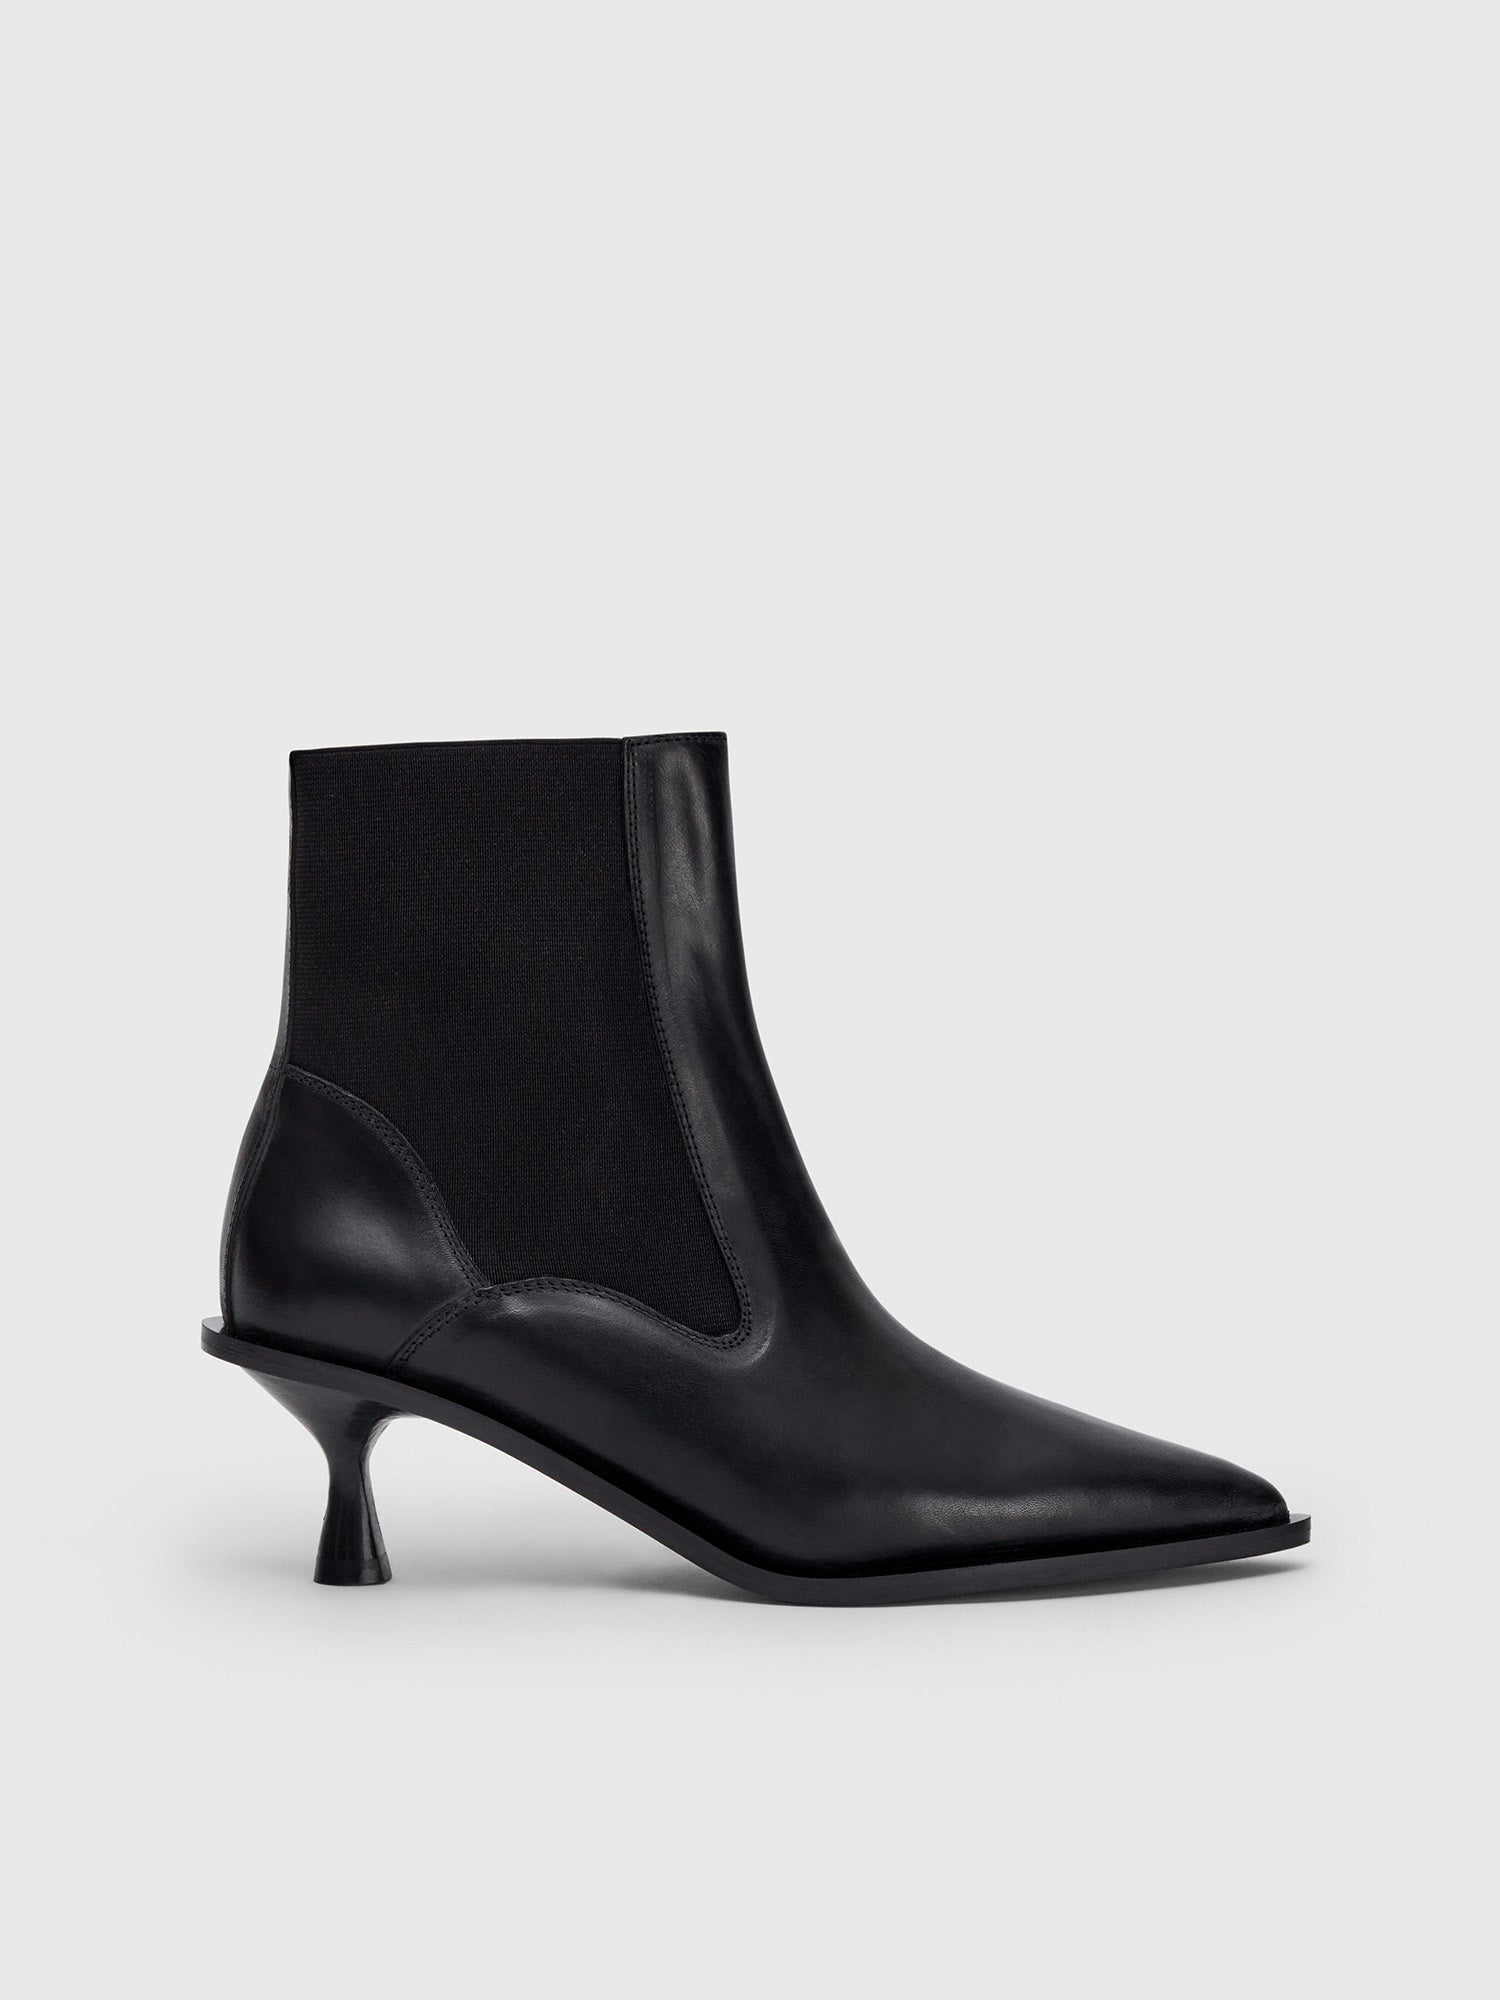 Trino Black Leather Ankle boots